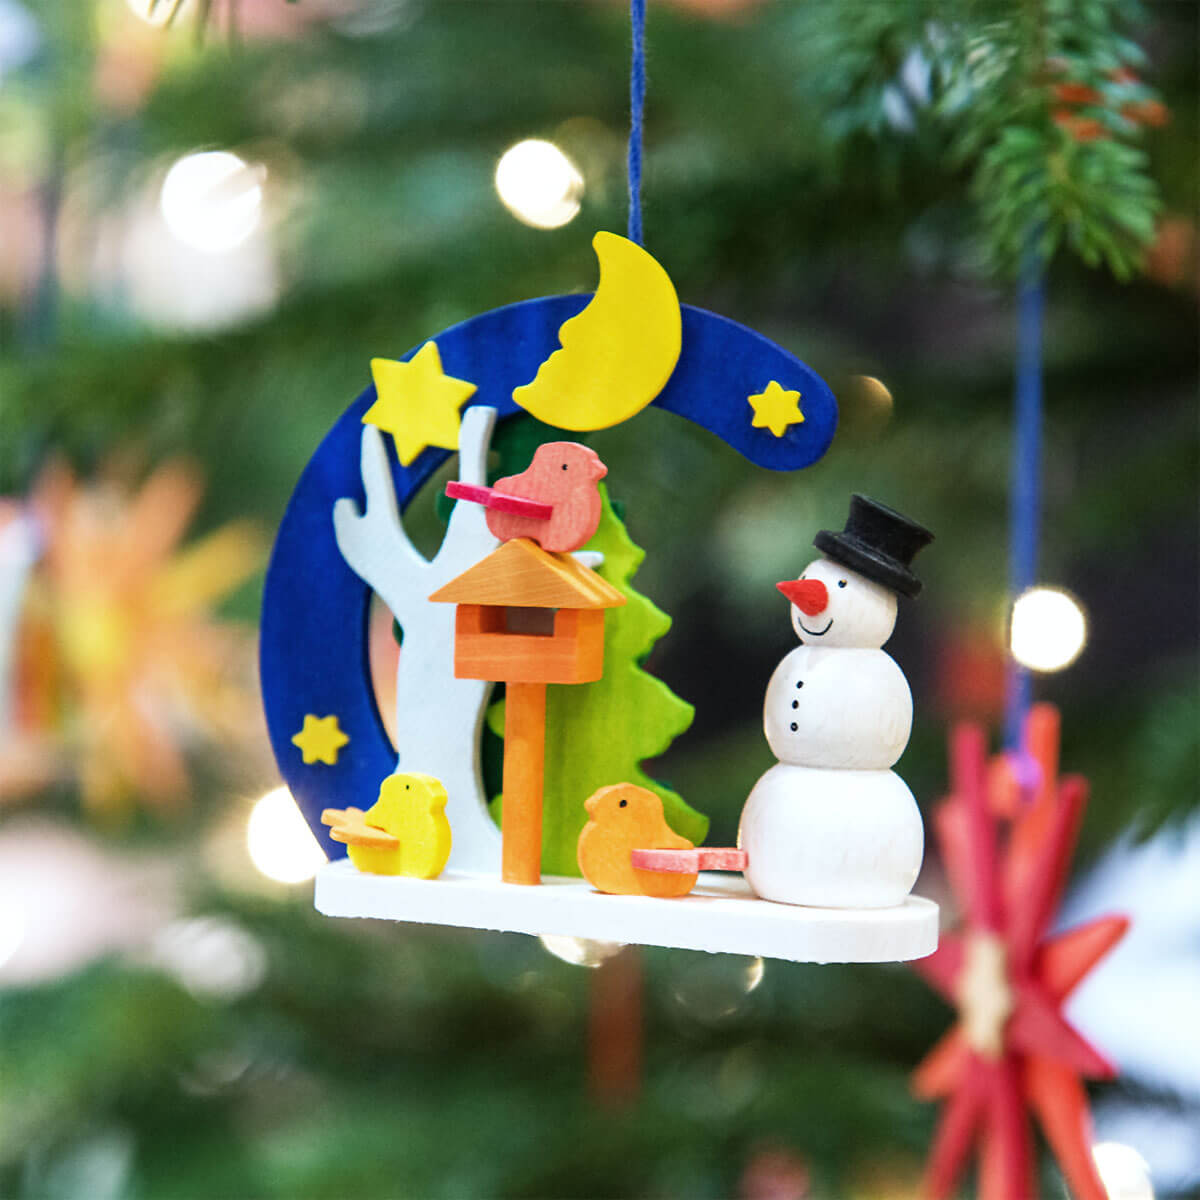 Arch 'Snowman' Ornament with rabbits